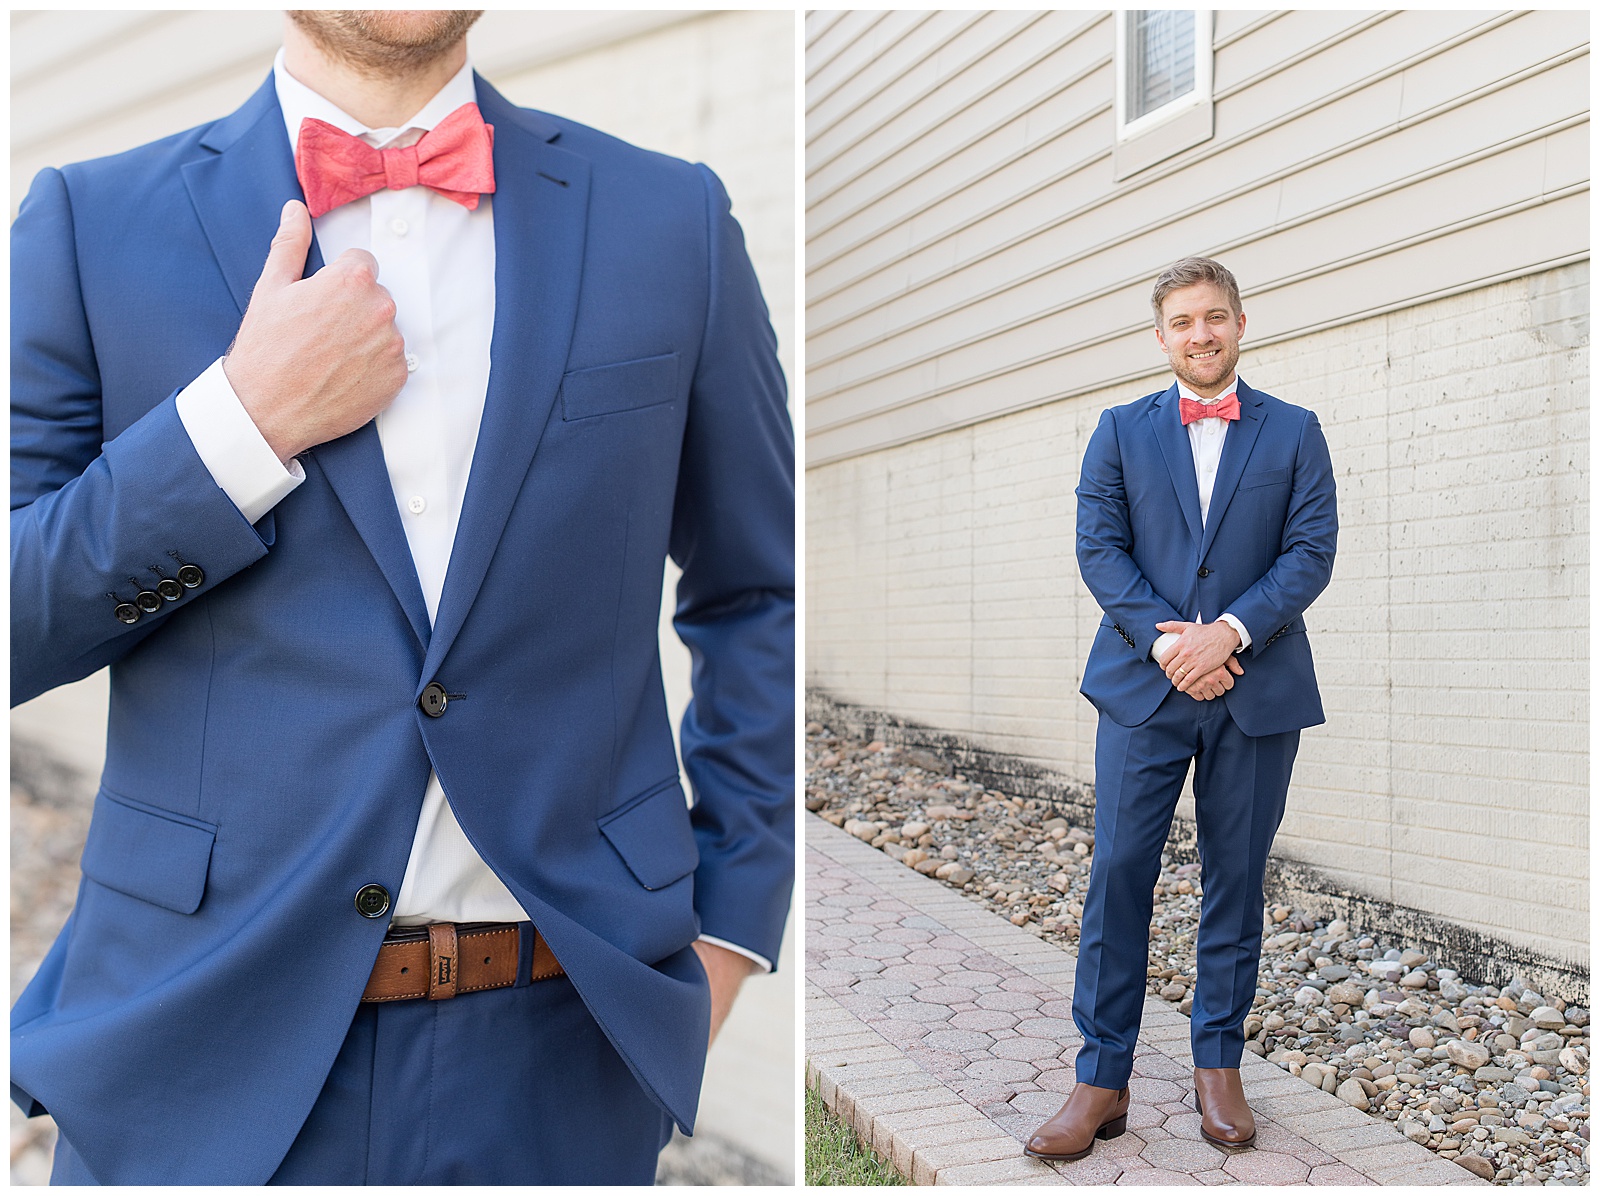 groom wearing navy blue suit with pink bow tie and brown belt poses along pathway before wedding ceremony